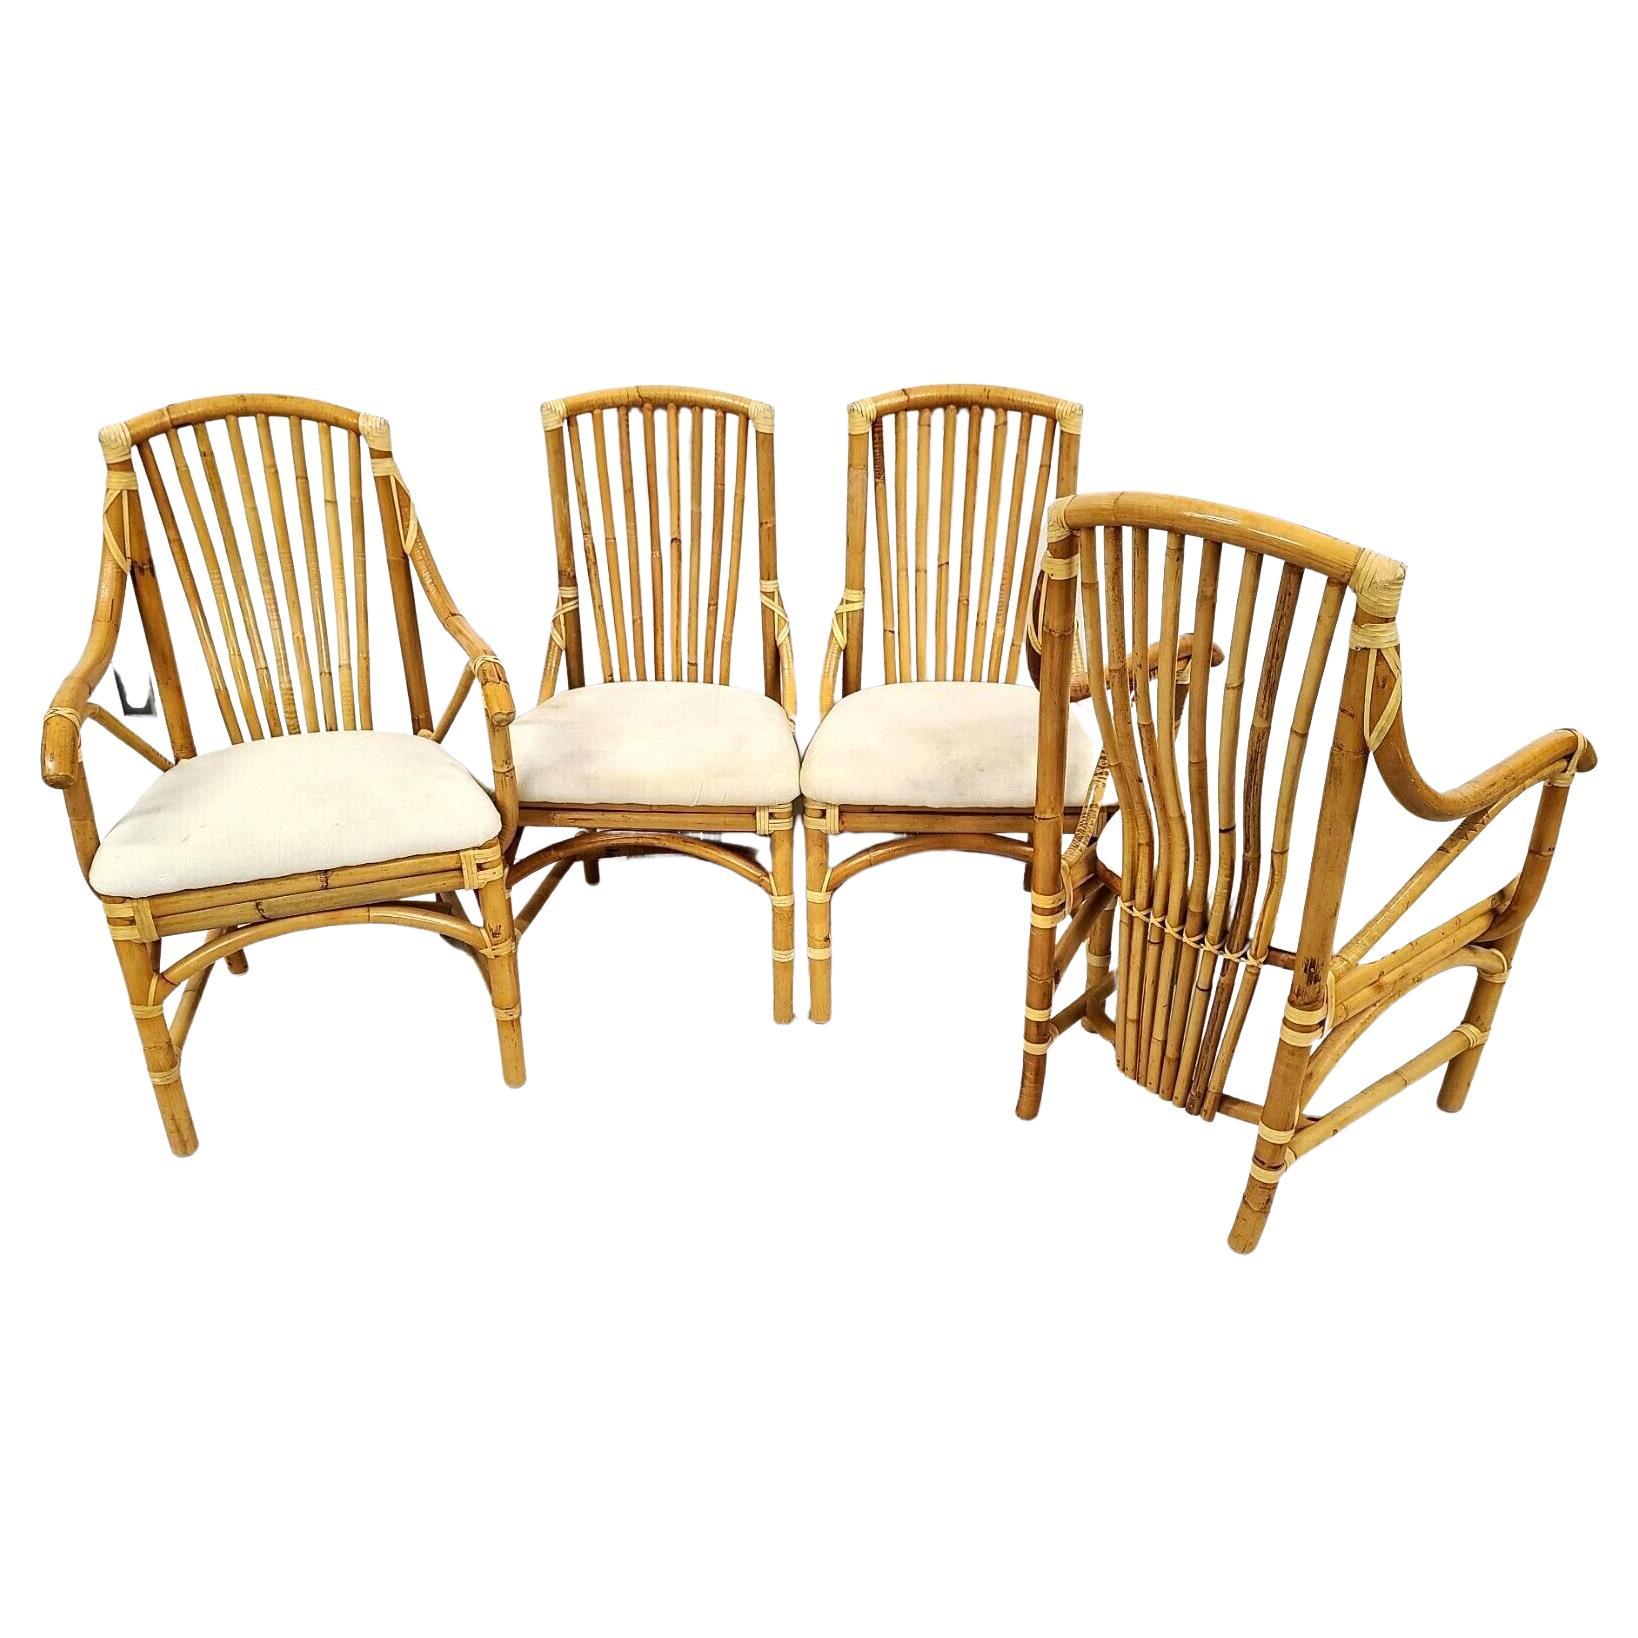 Vintage 1970s Bamboo Rattan Chairs, Set of 4